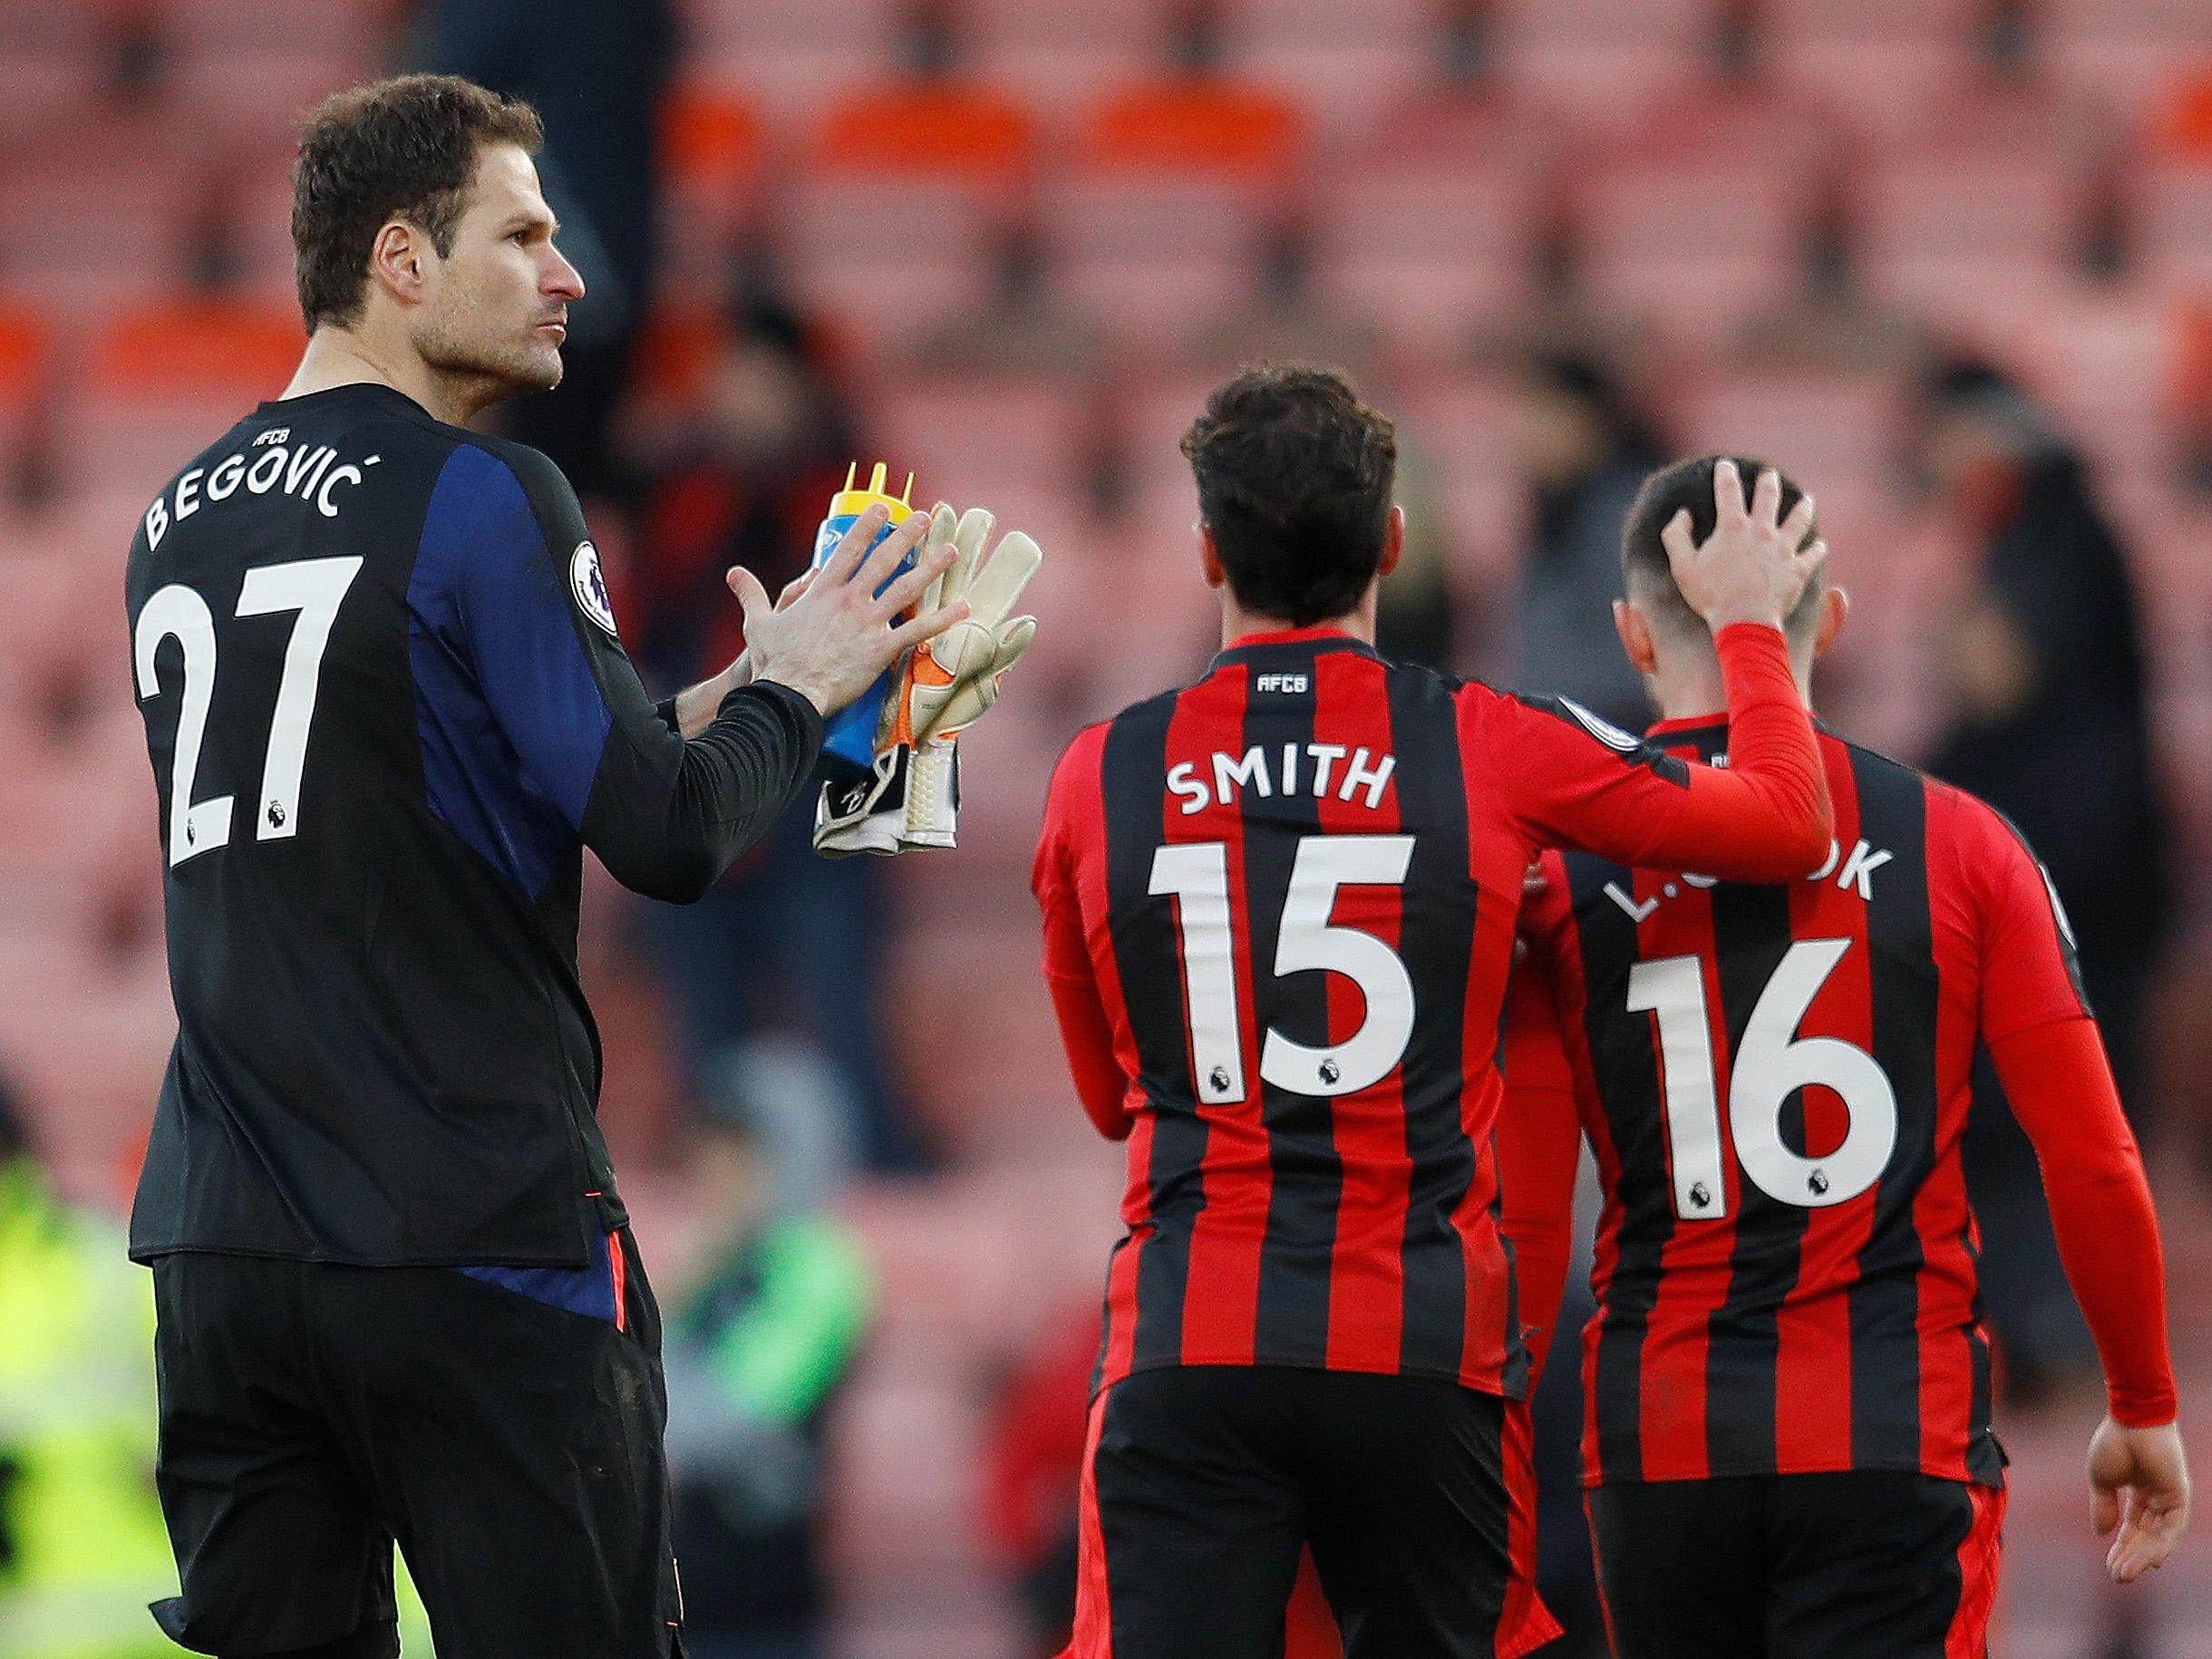 Bournemouth were unlikely winners given the circumstances